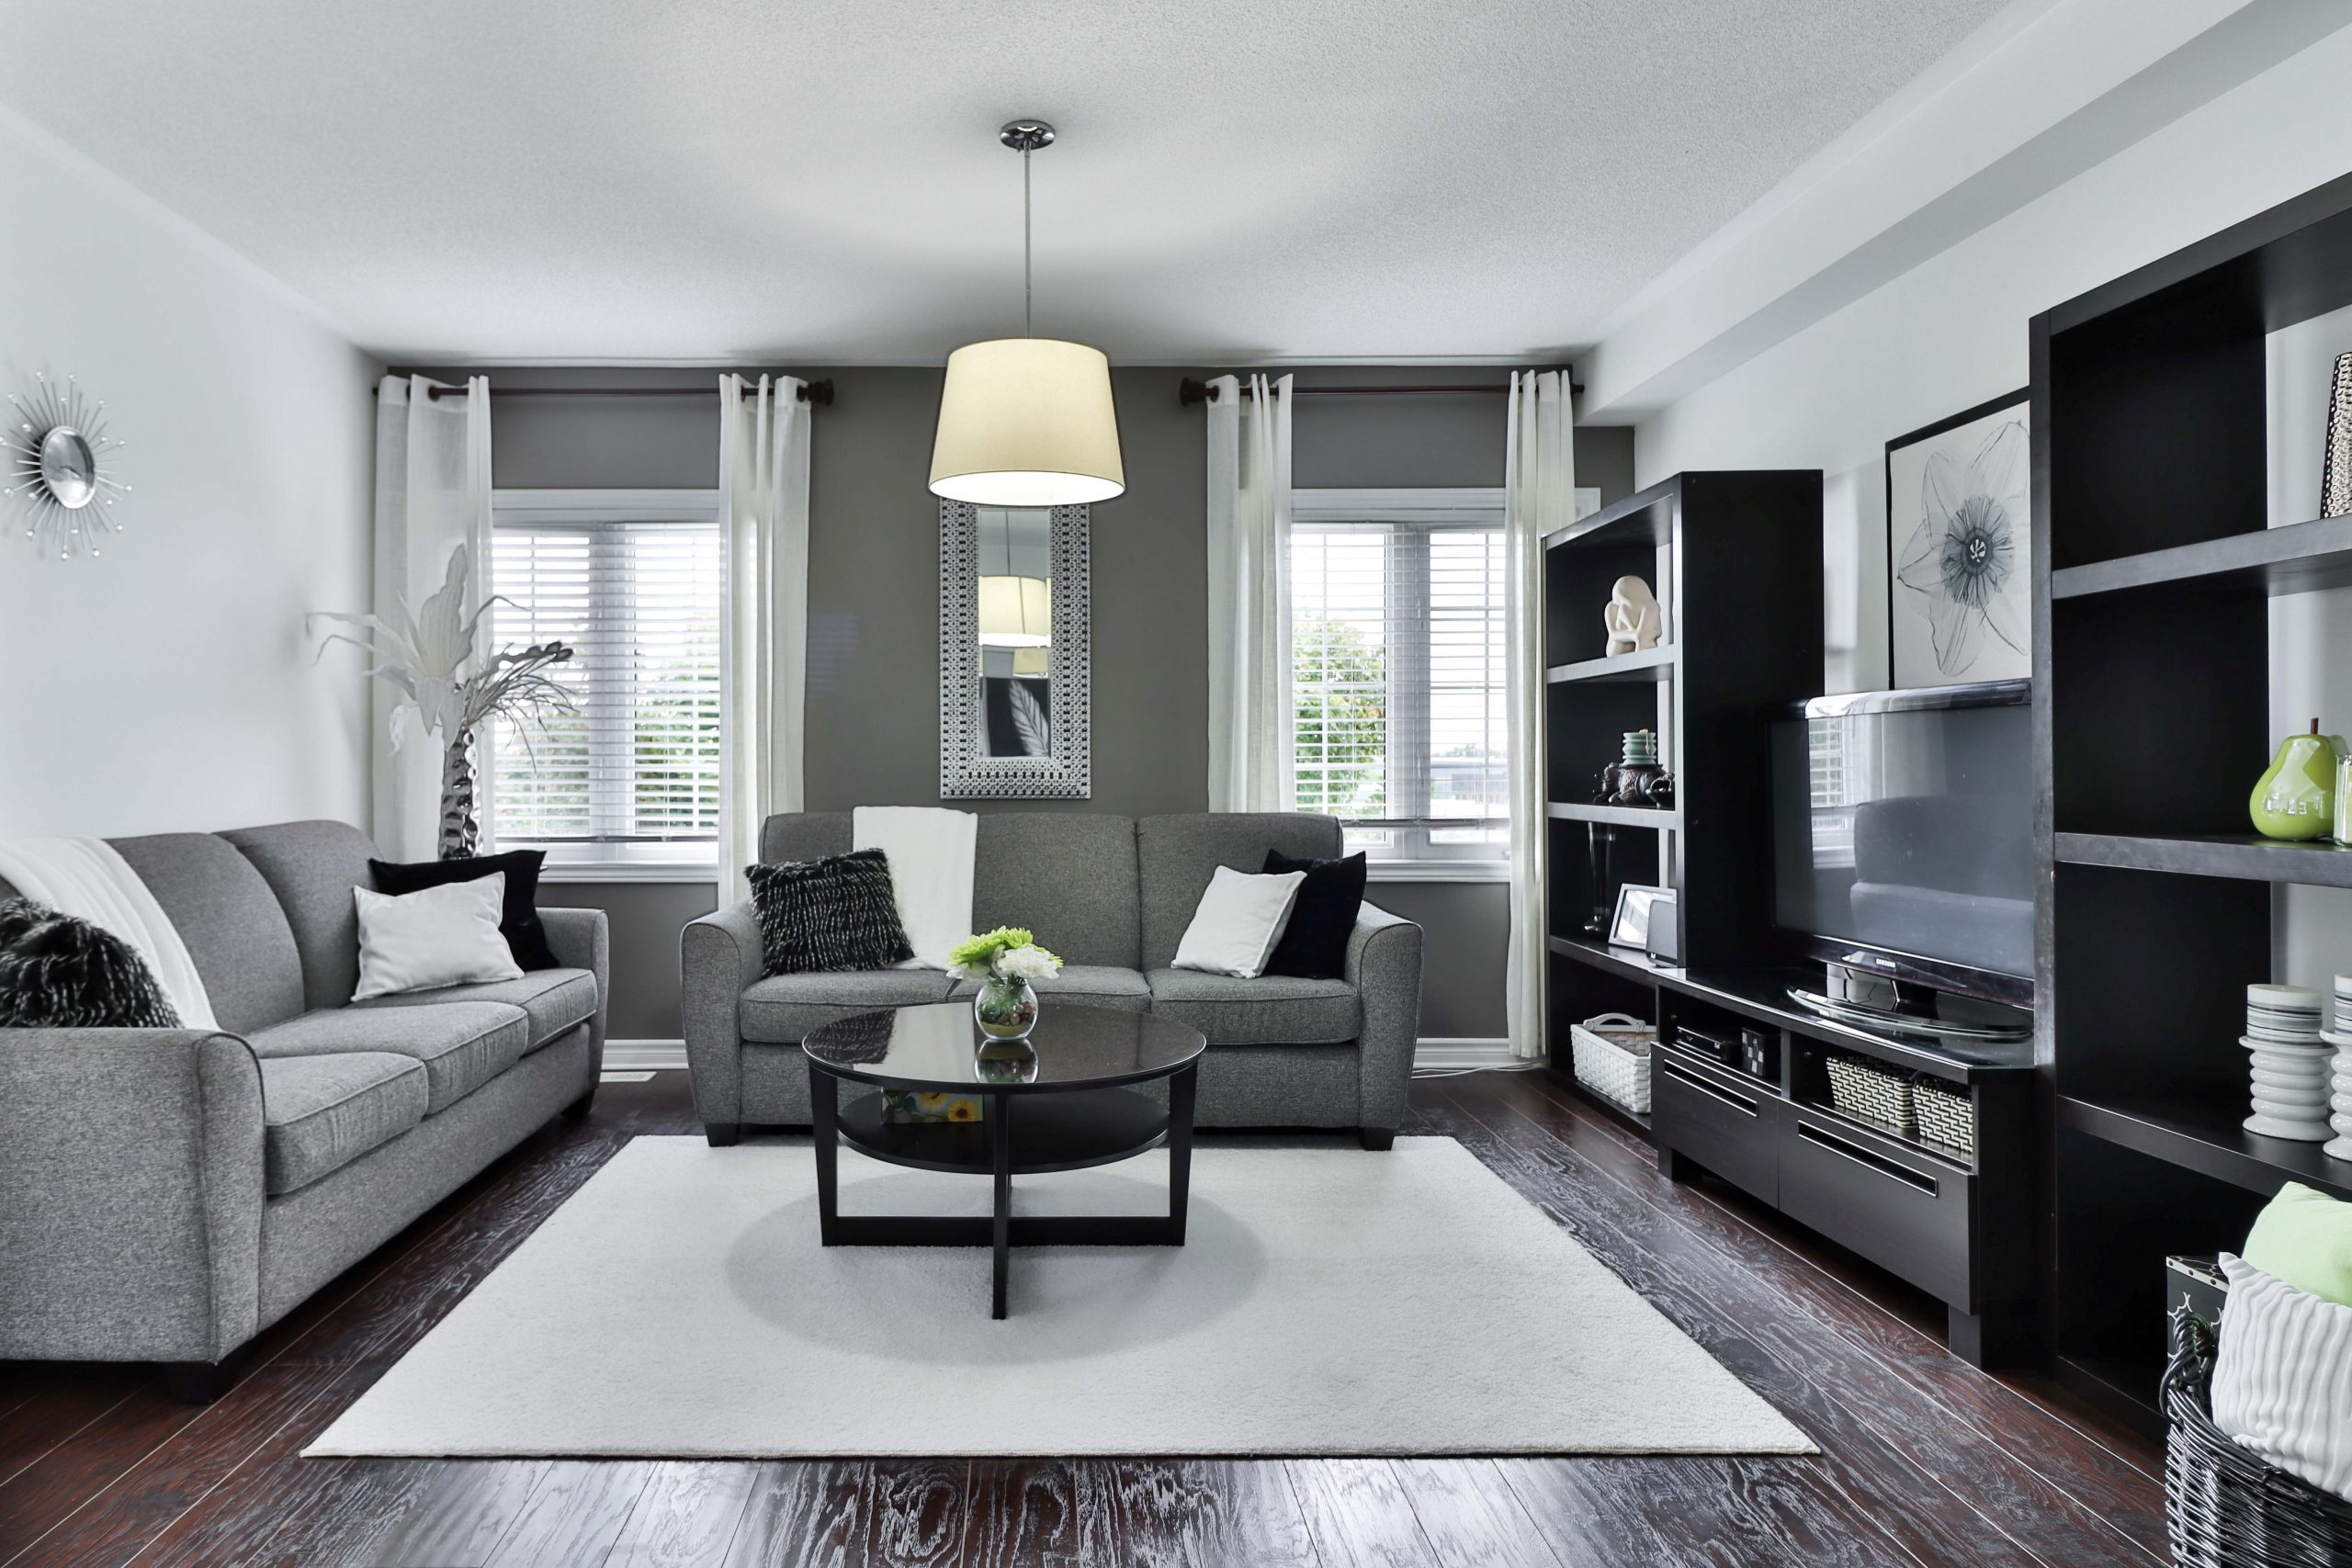 A modern living room with a gray accent wall